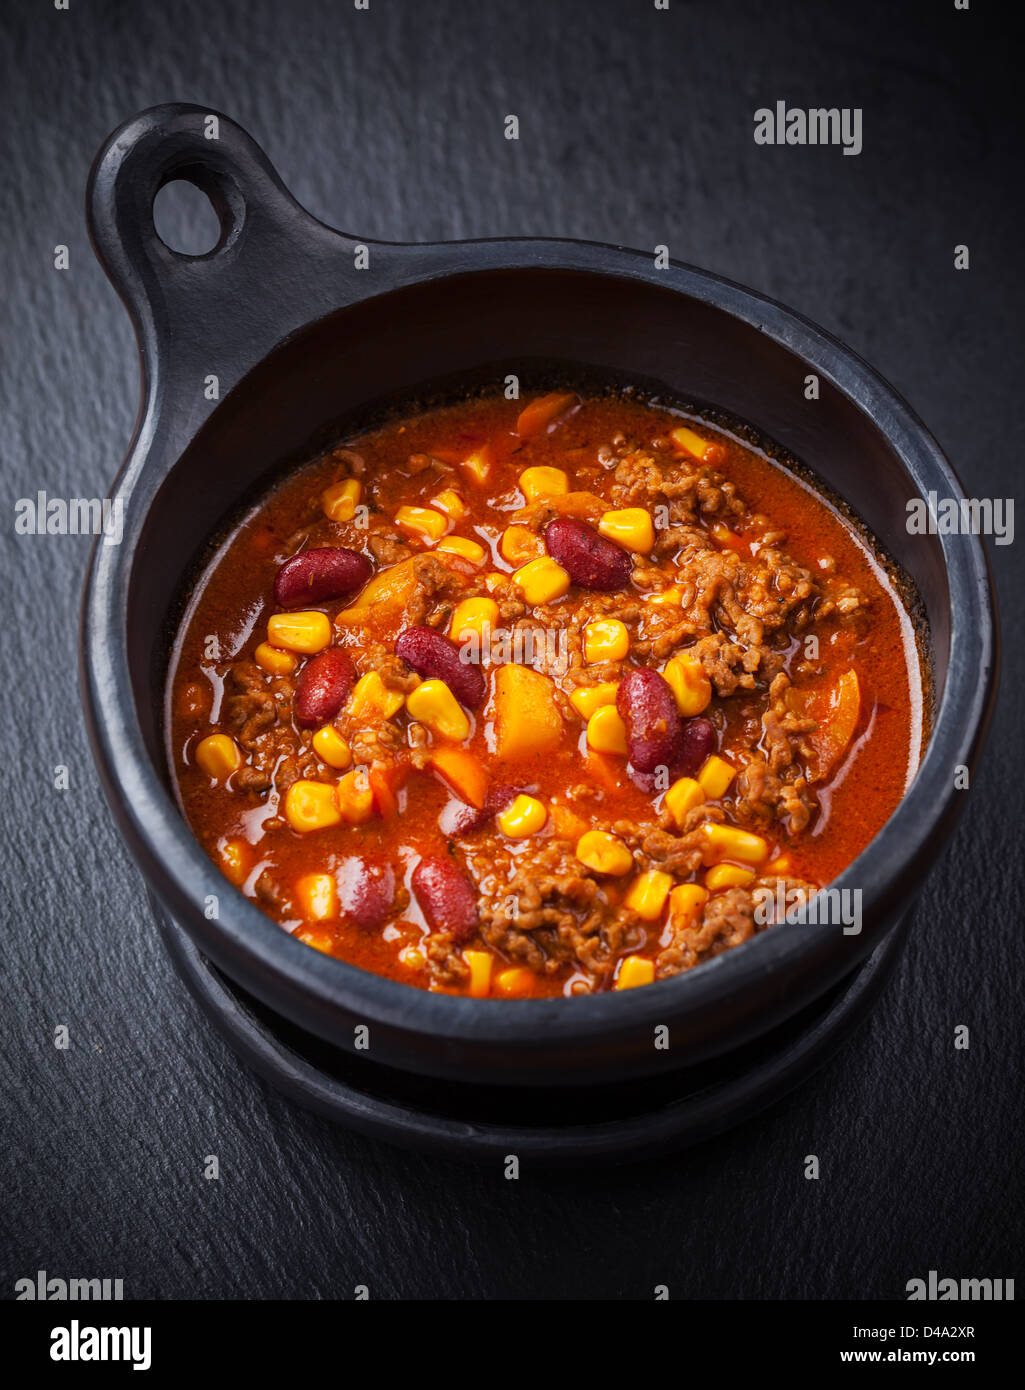 Hot chili con carne Banque D'Images